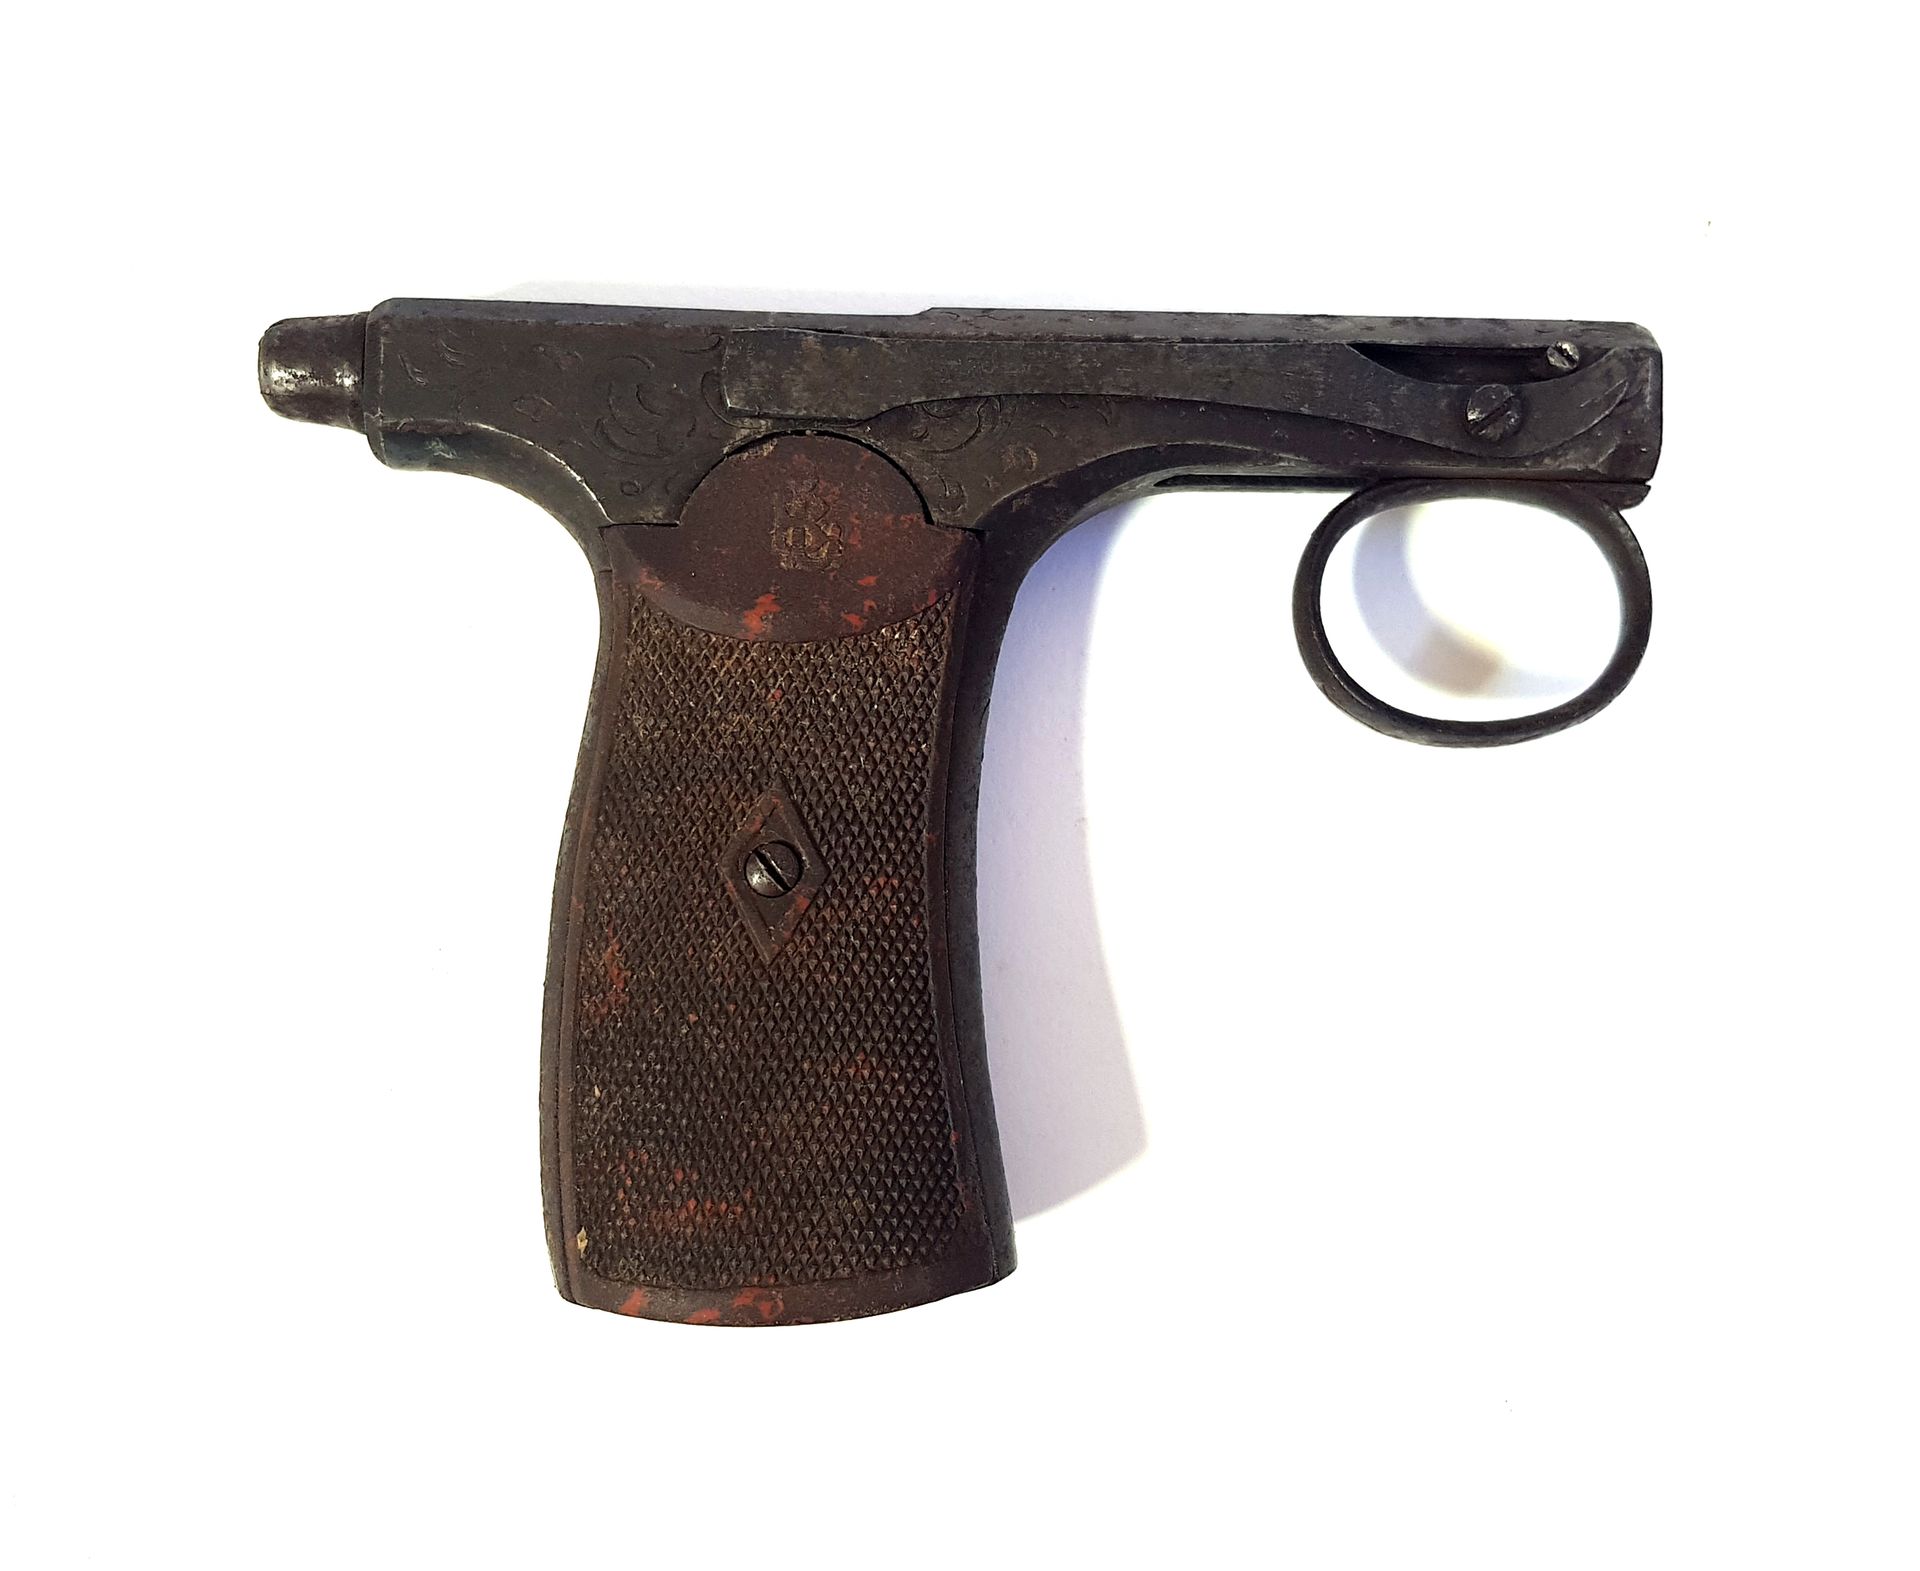 Null Pistol type Brown Latrige

L. 12,2 cm

Worn

Category D - free sale to over&hellip;